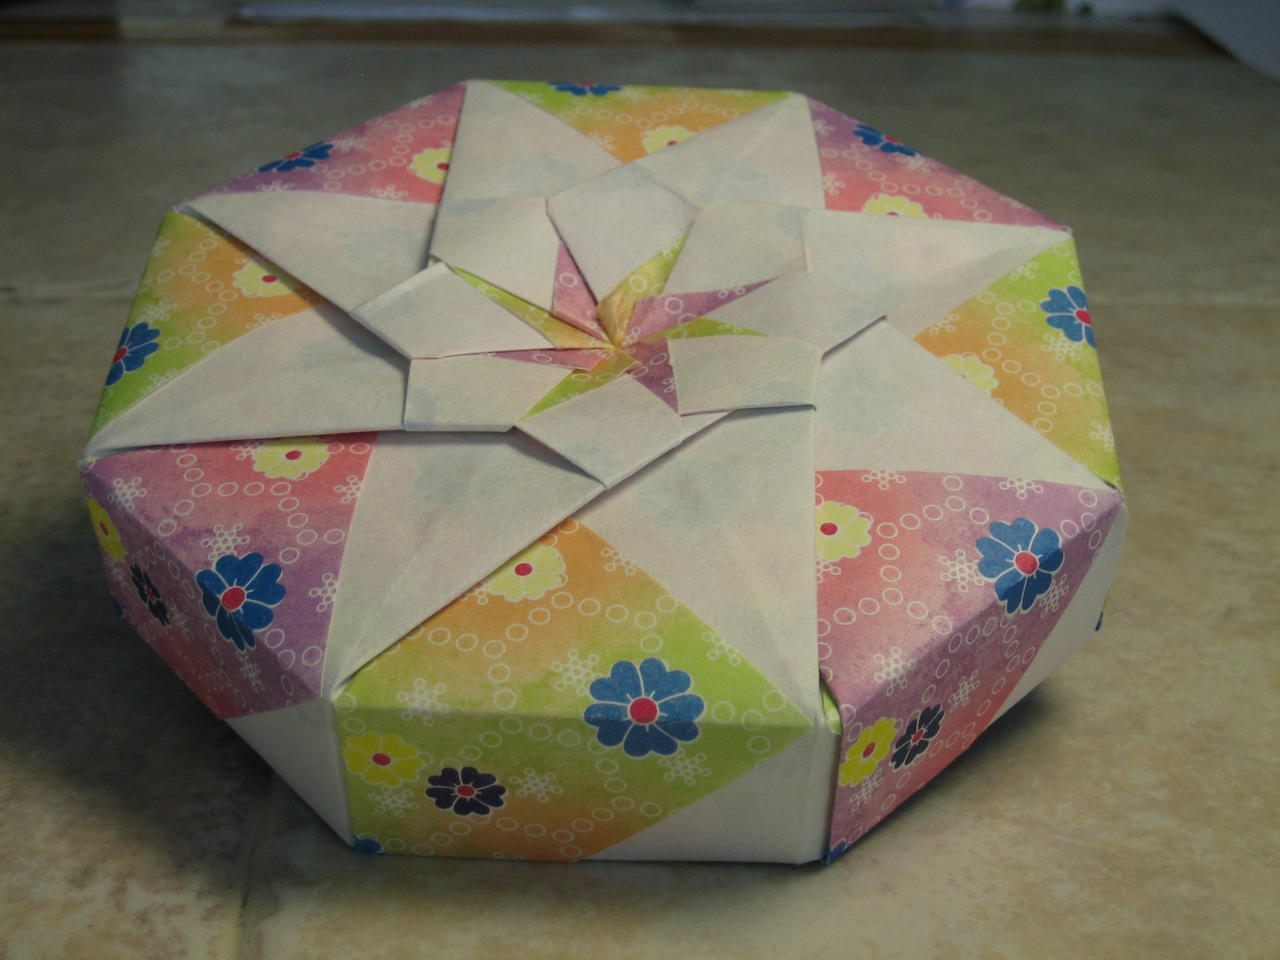 Joyful Origami boxes by Tomoko Fuse by PaperChang on DeviantArt